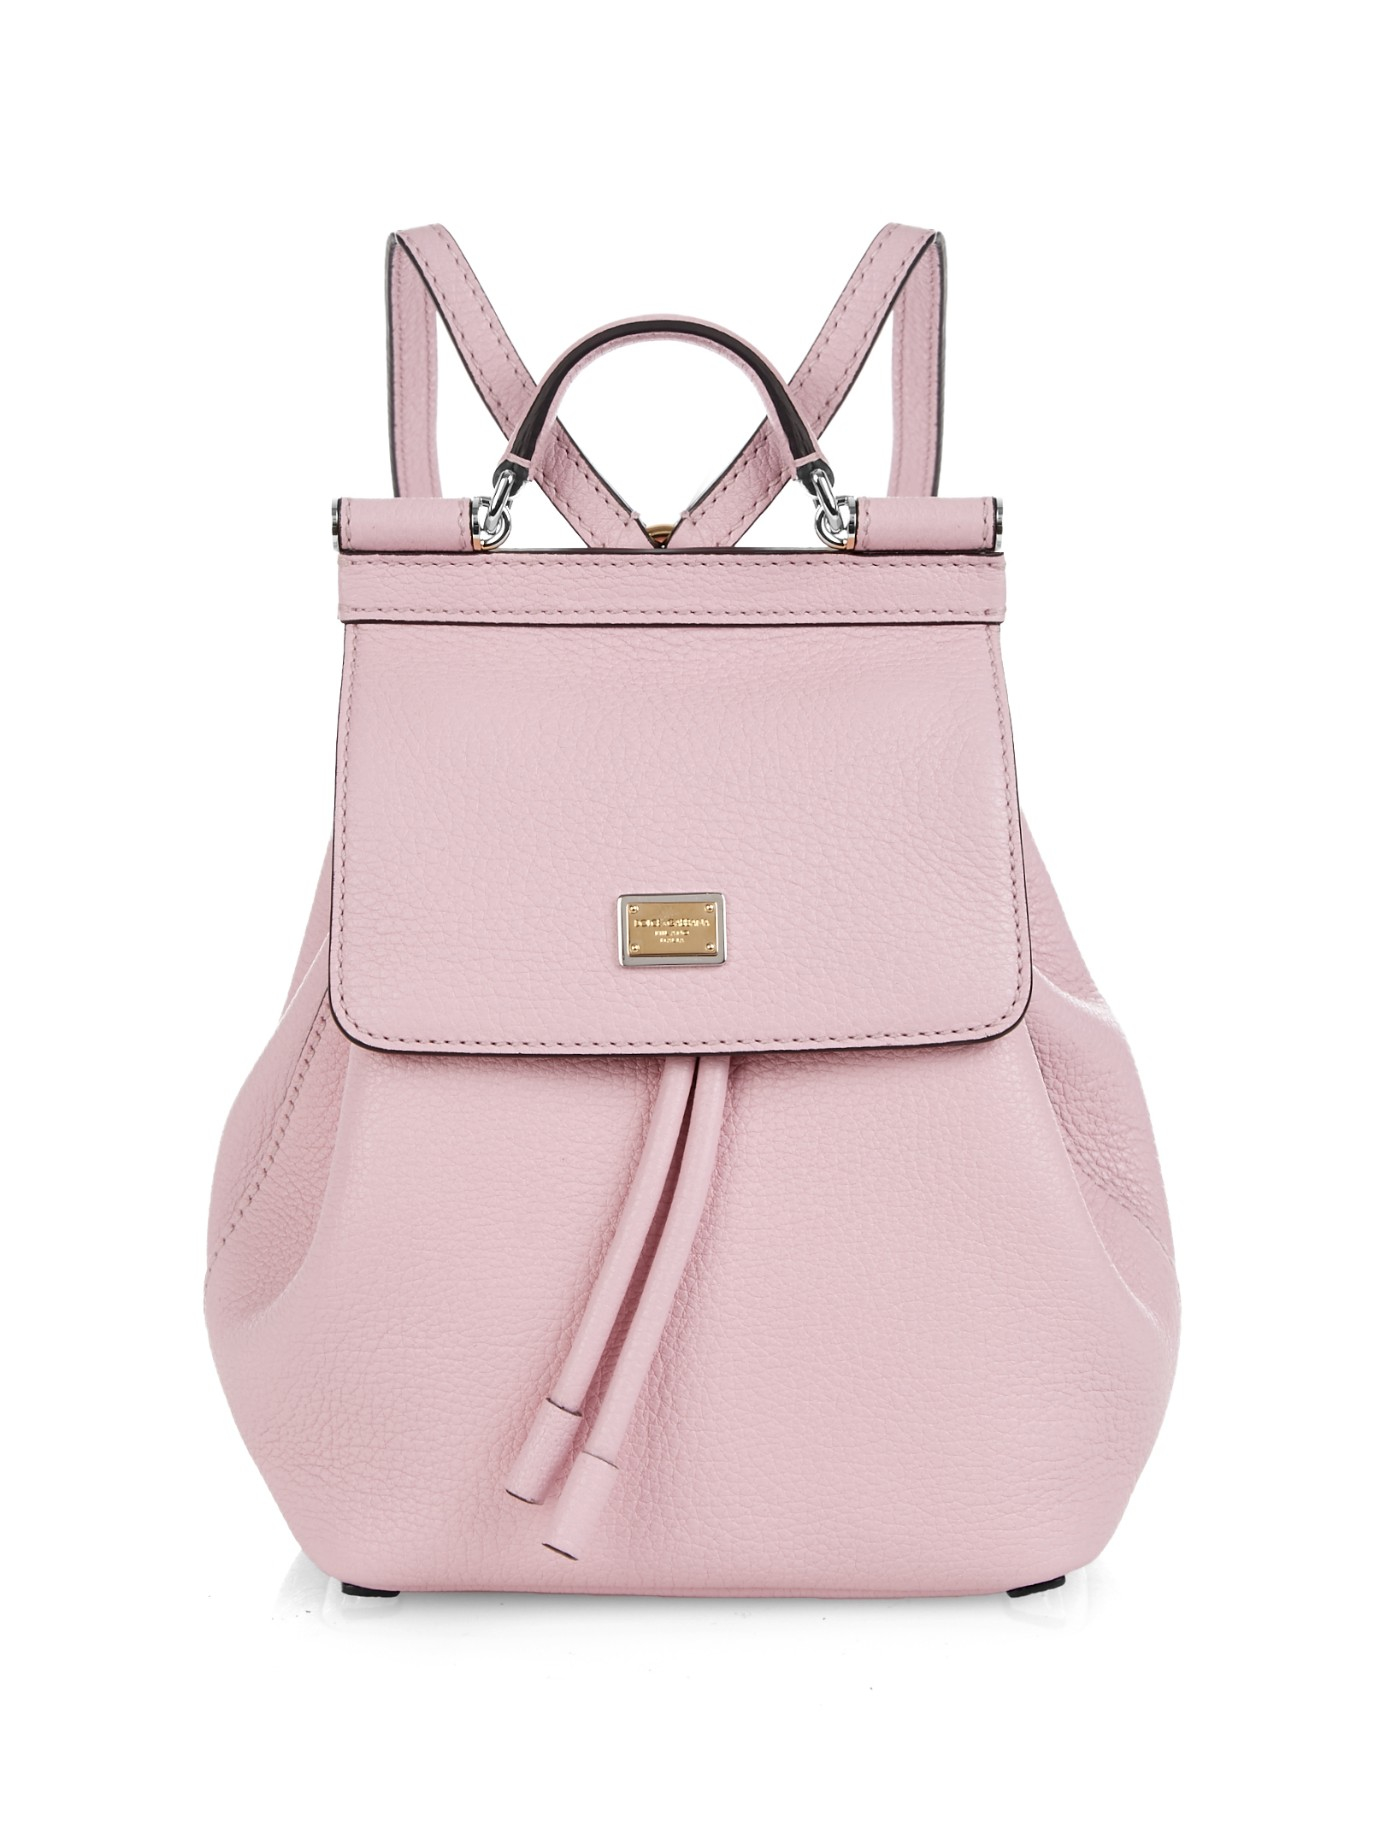 Dolce & gabbana Sicily Micro Leather Backpack in Pink | Lyst